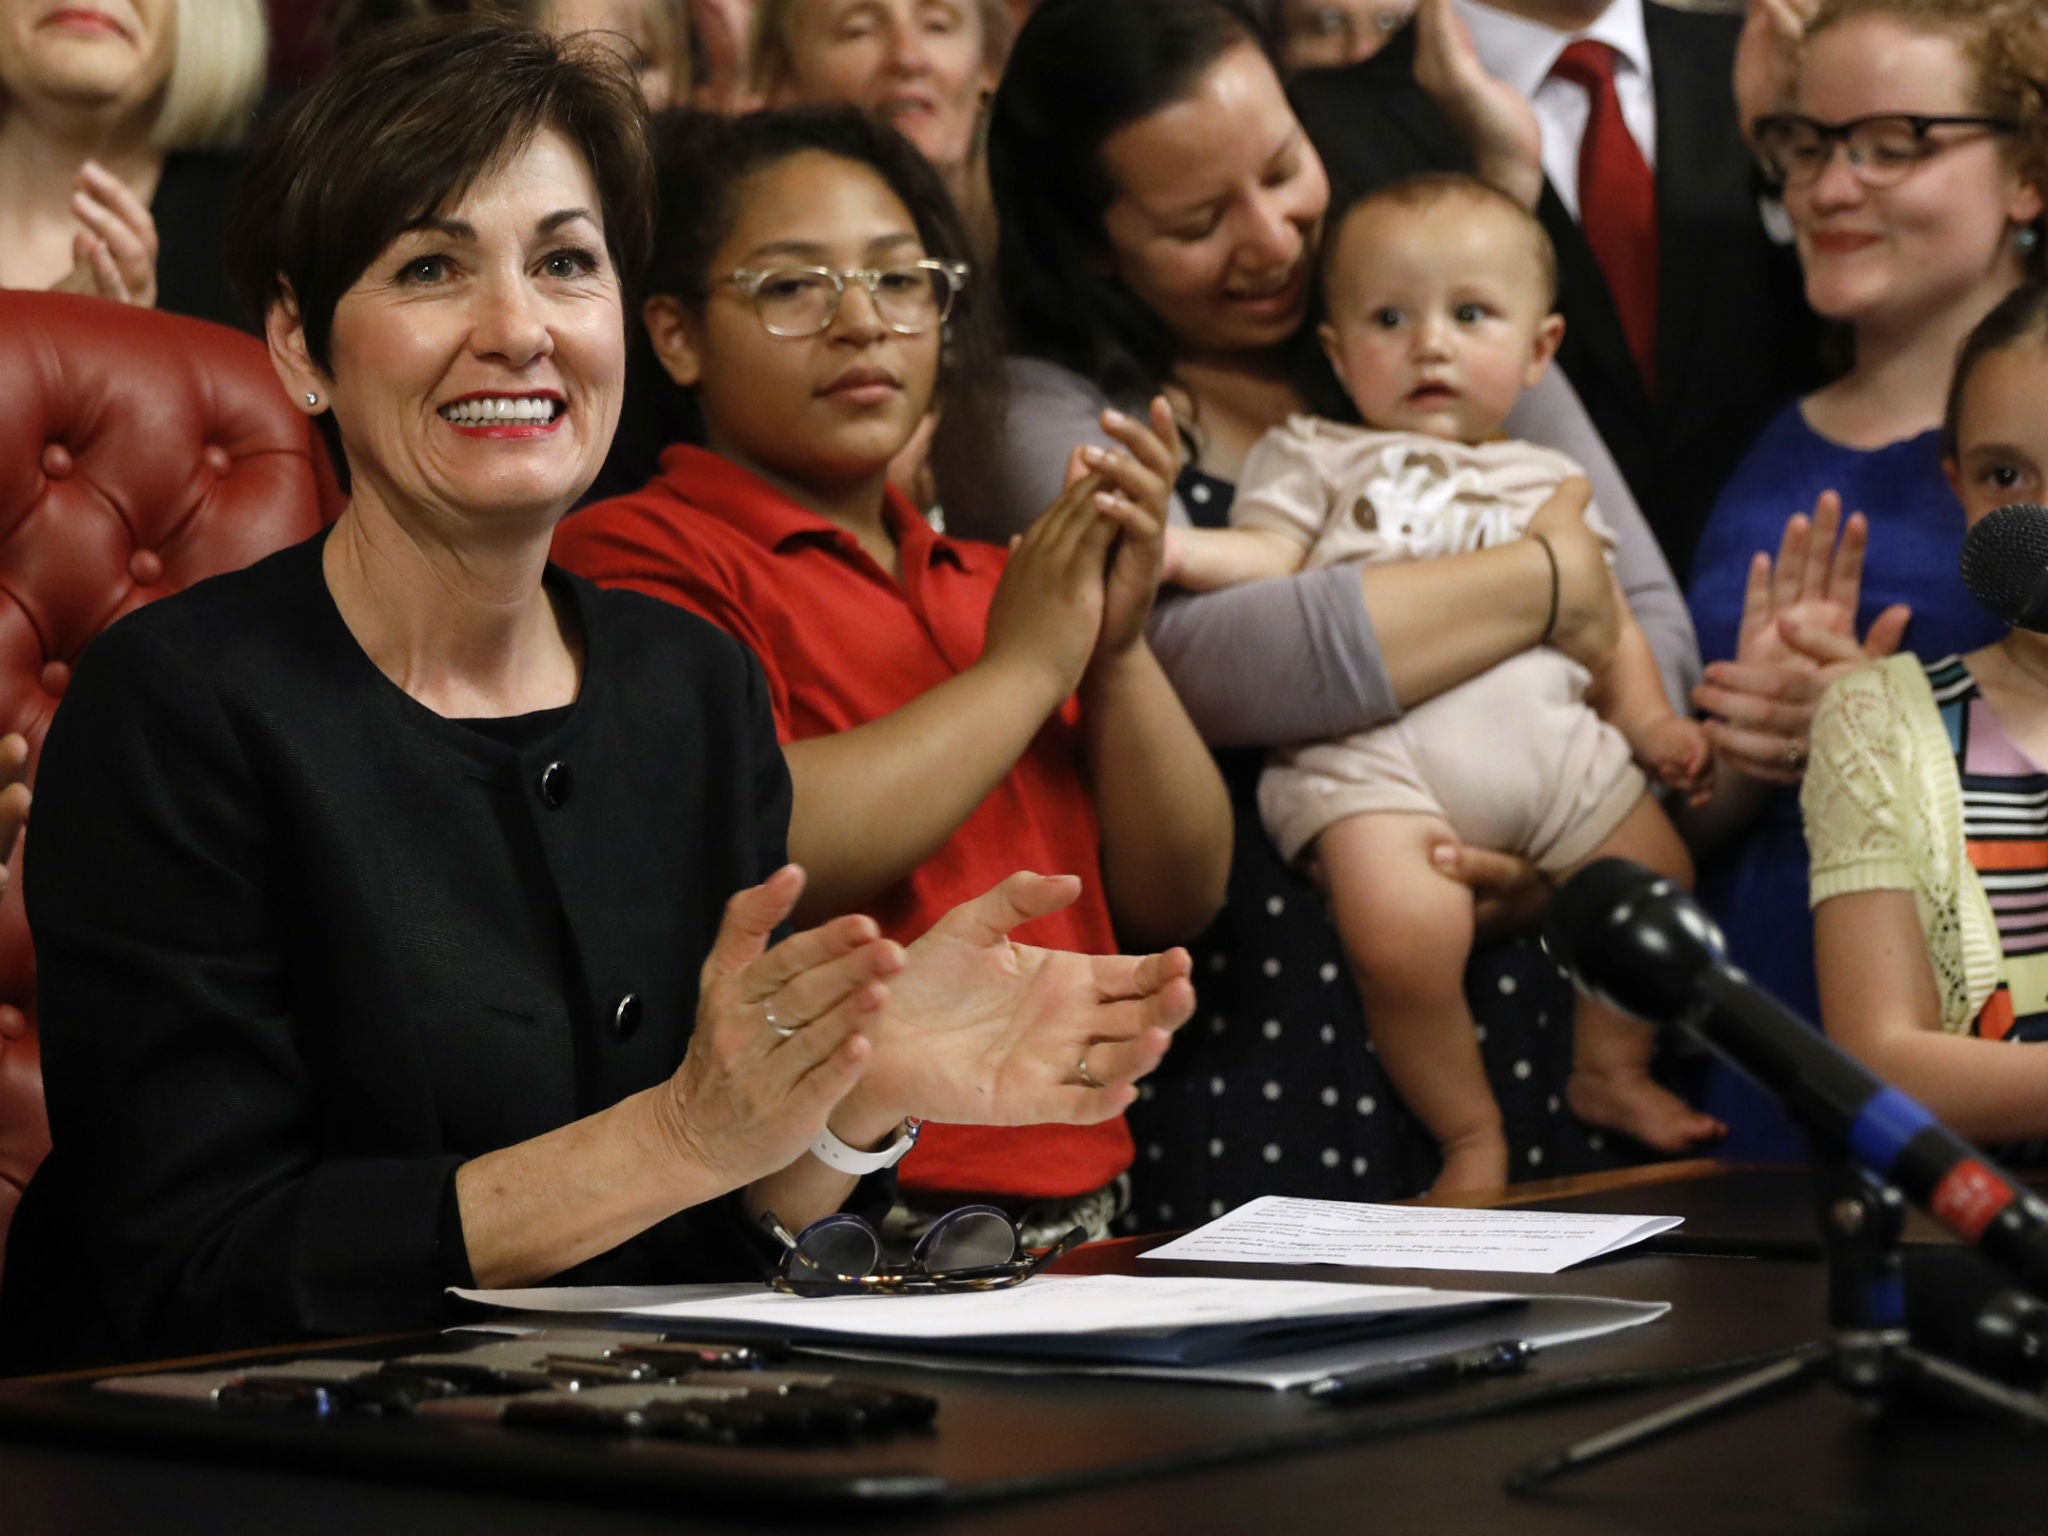 Iowa Governor Kim Reynolds said her signing the bill was 'bigger than just a law'